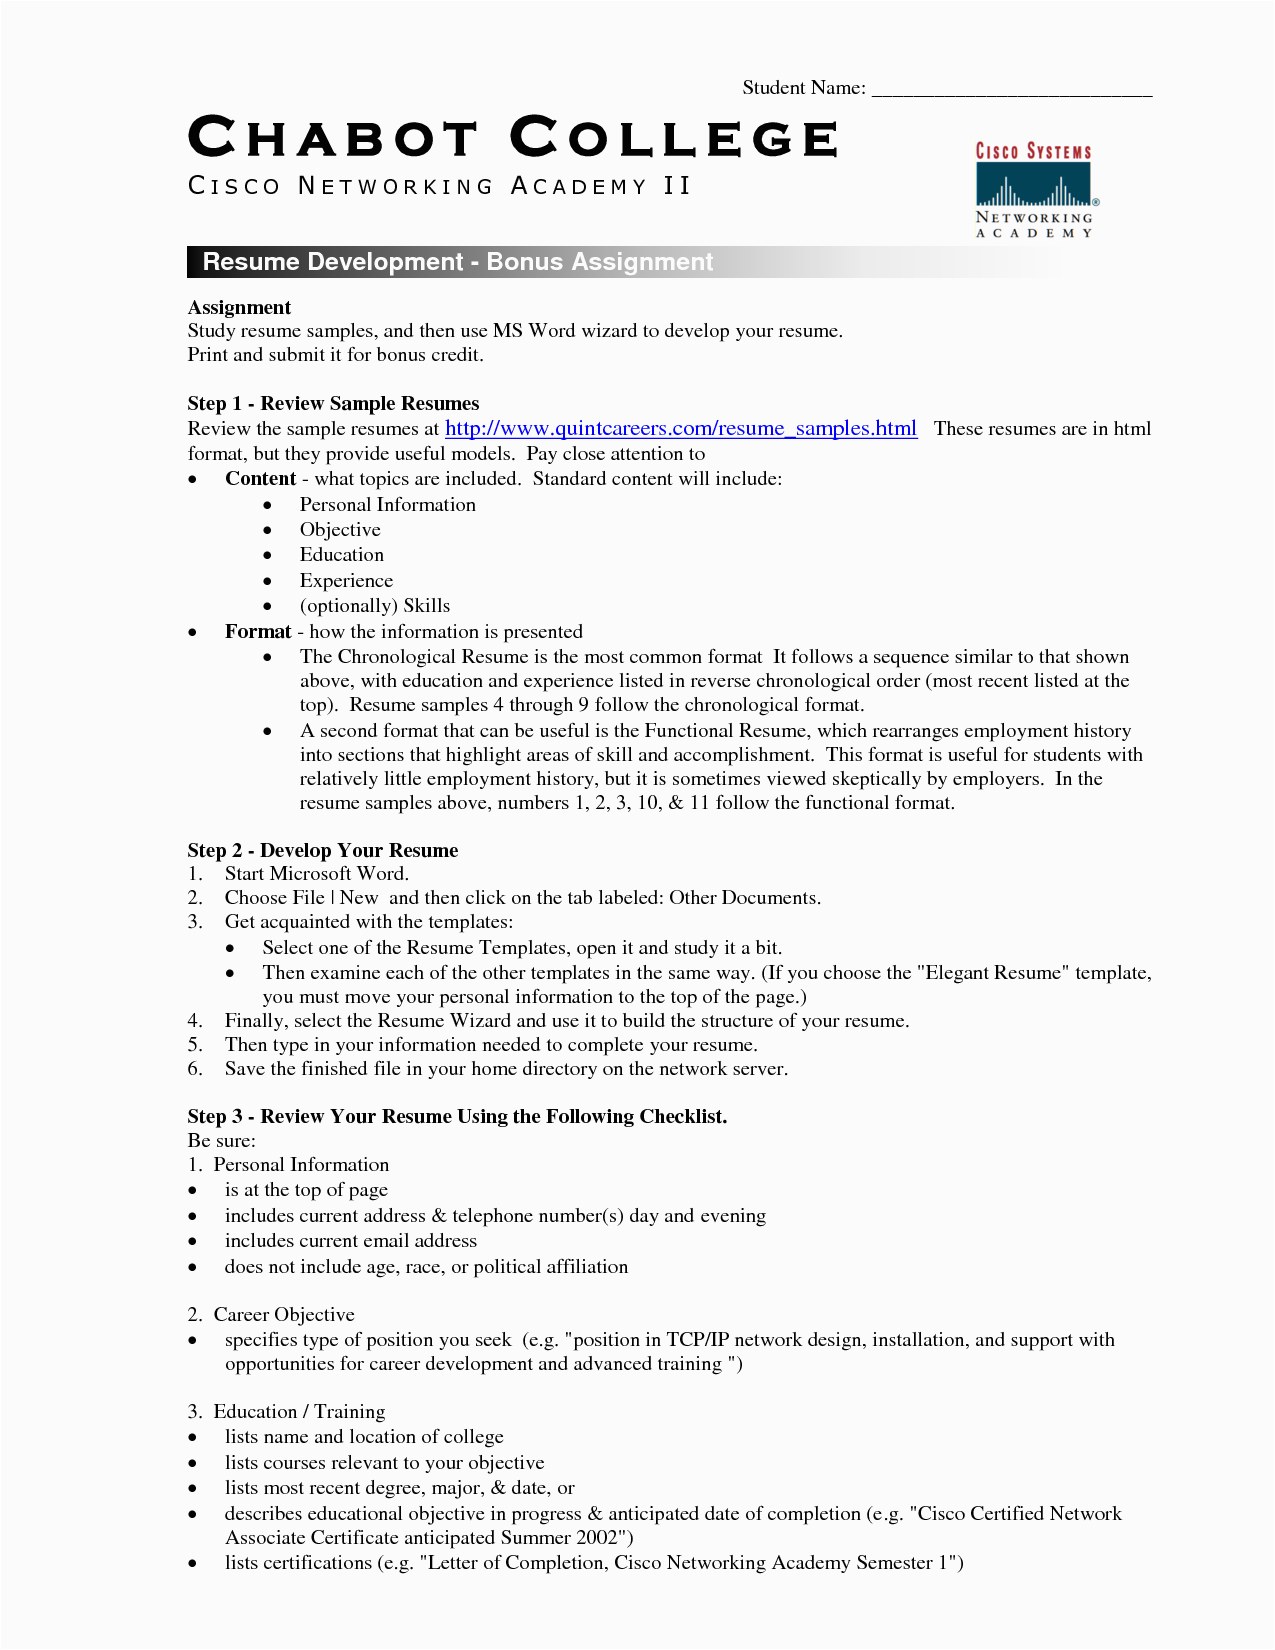 Resume Samples for College Students Pdf College Student Resume Template Microsoft Word – Task List